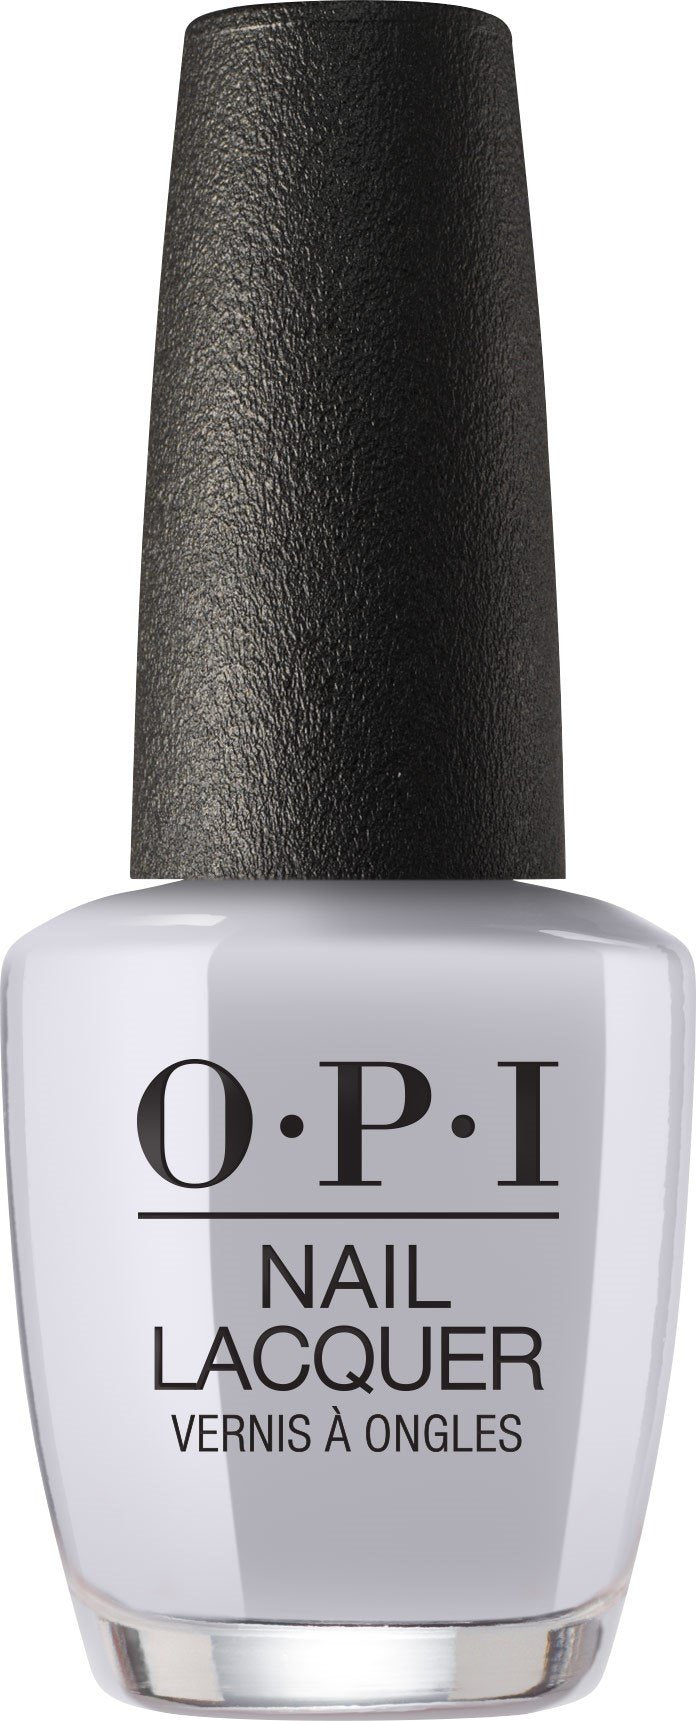 Beautiful OPI Nail Polish Colors to Try out This Summer | Opi nail polish  colors, Opi gel nails, White gel nails